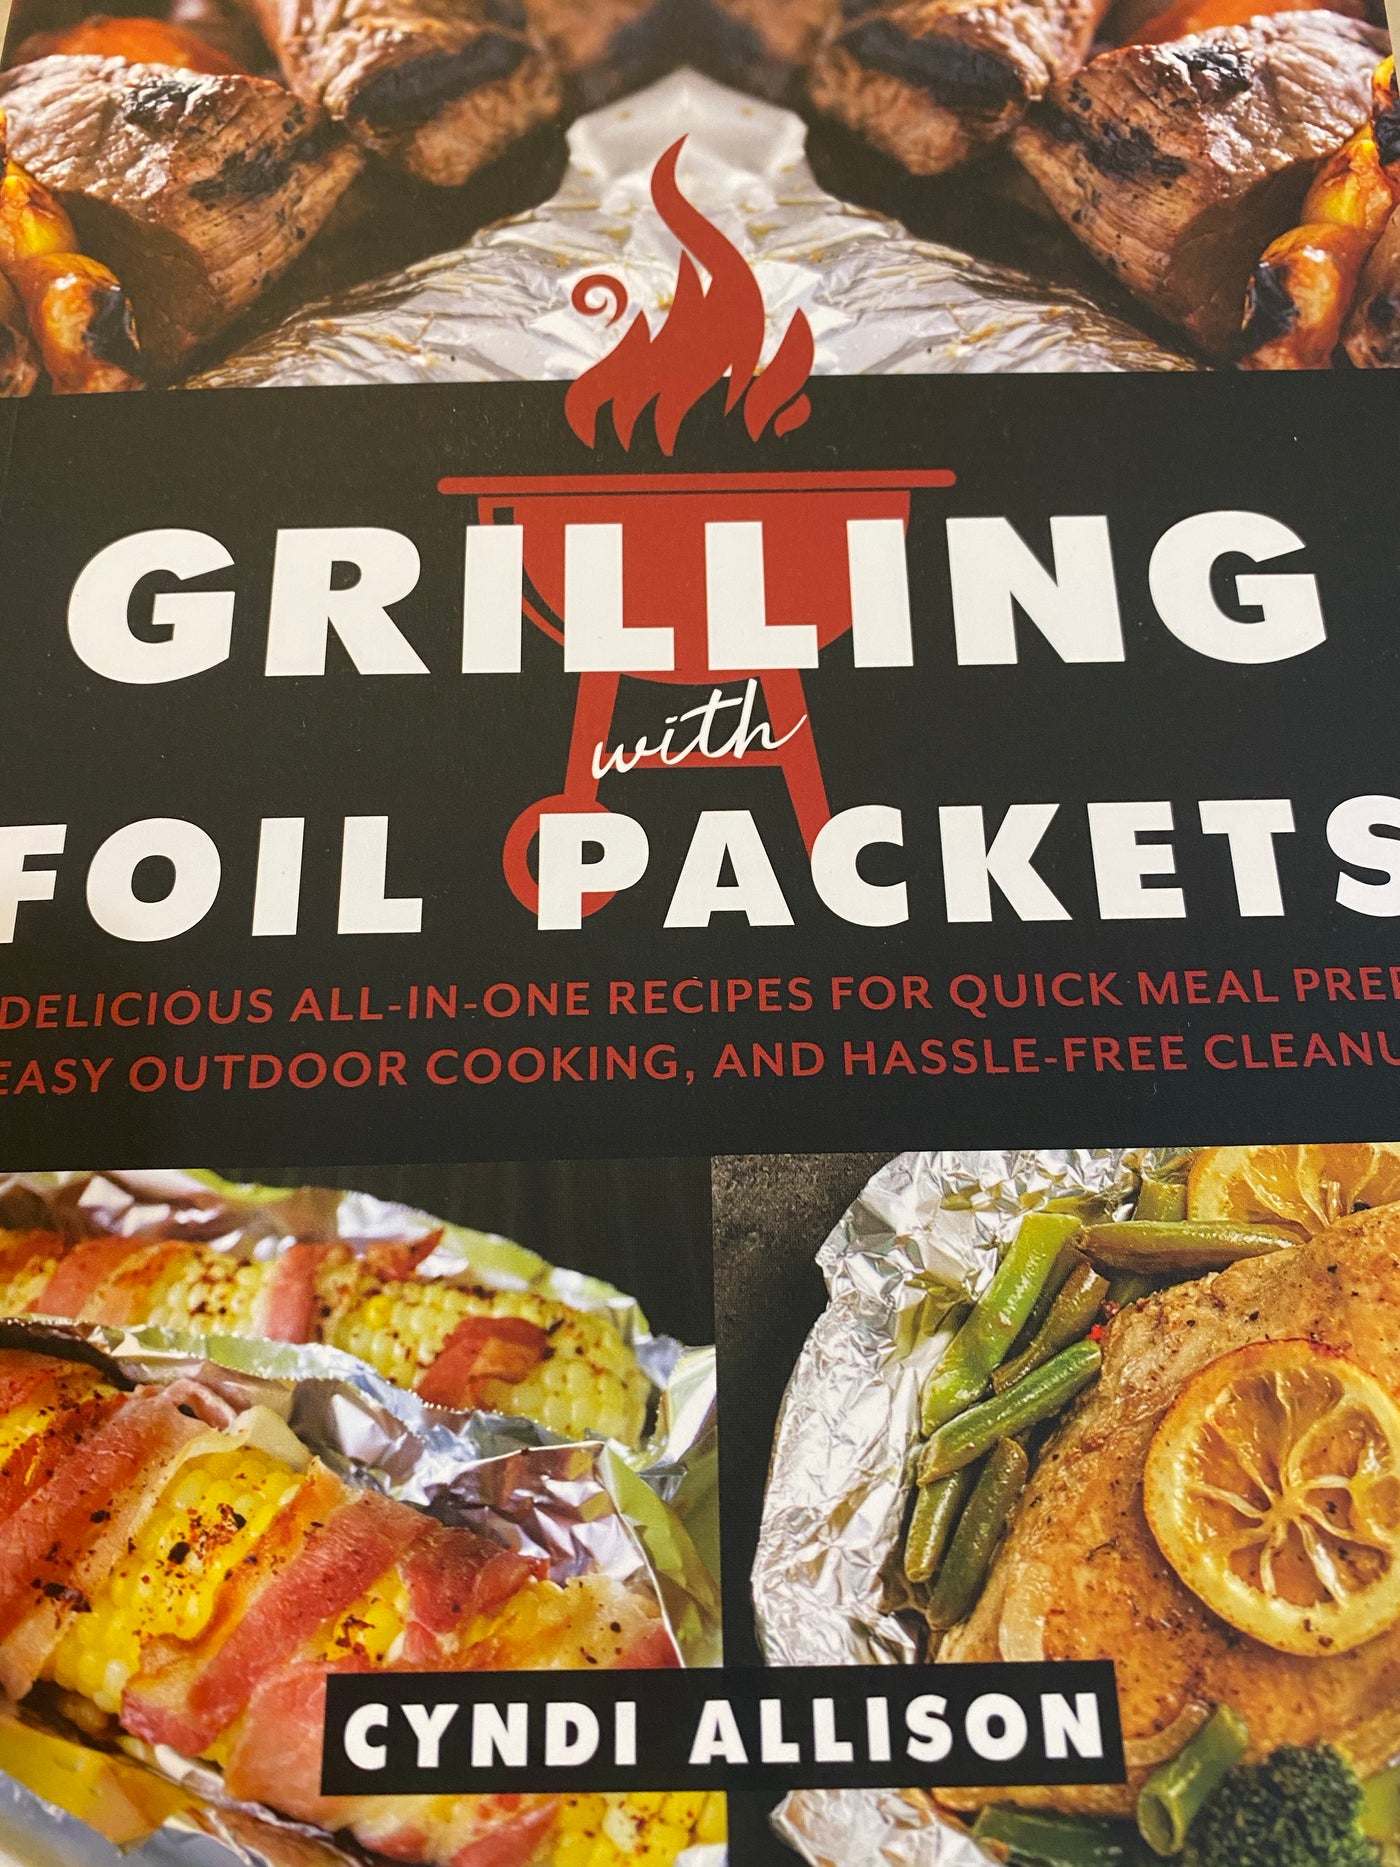 Grilling with Foil Packets - Cookbook